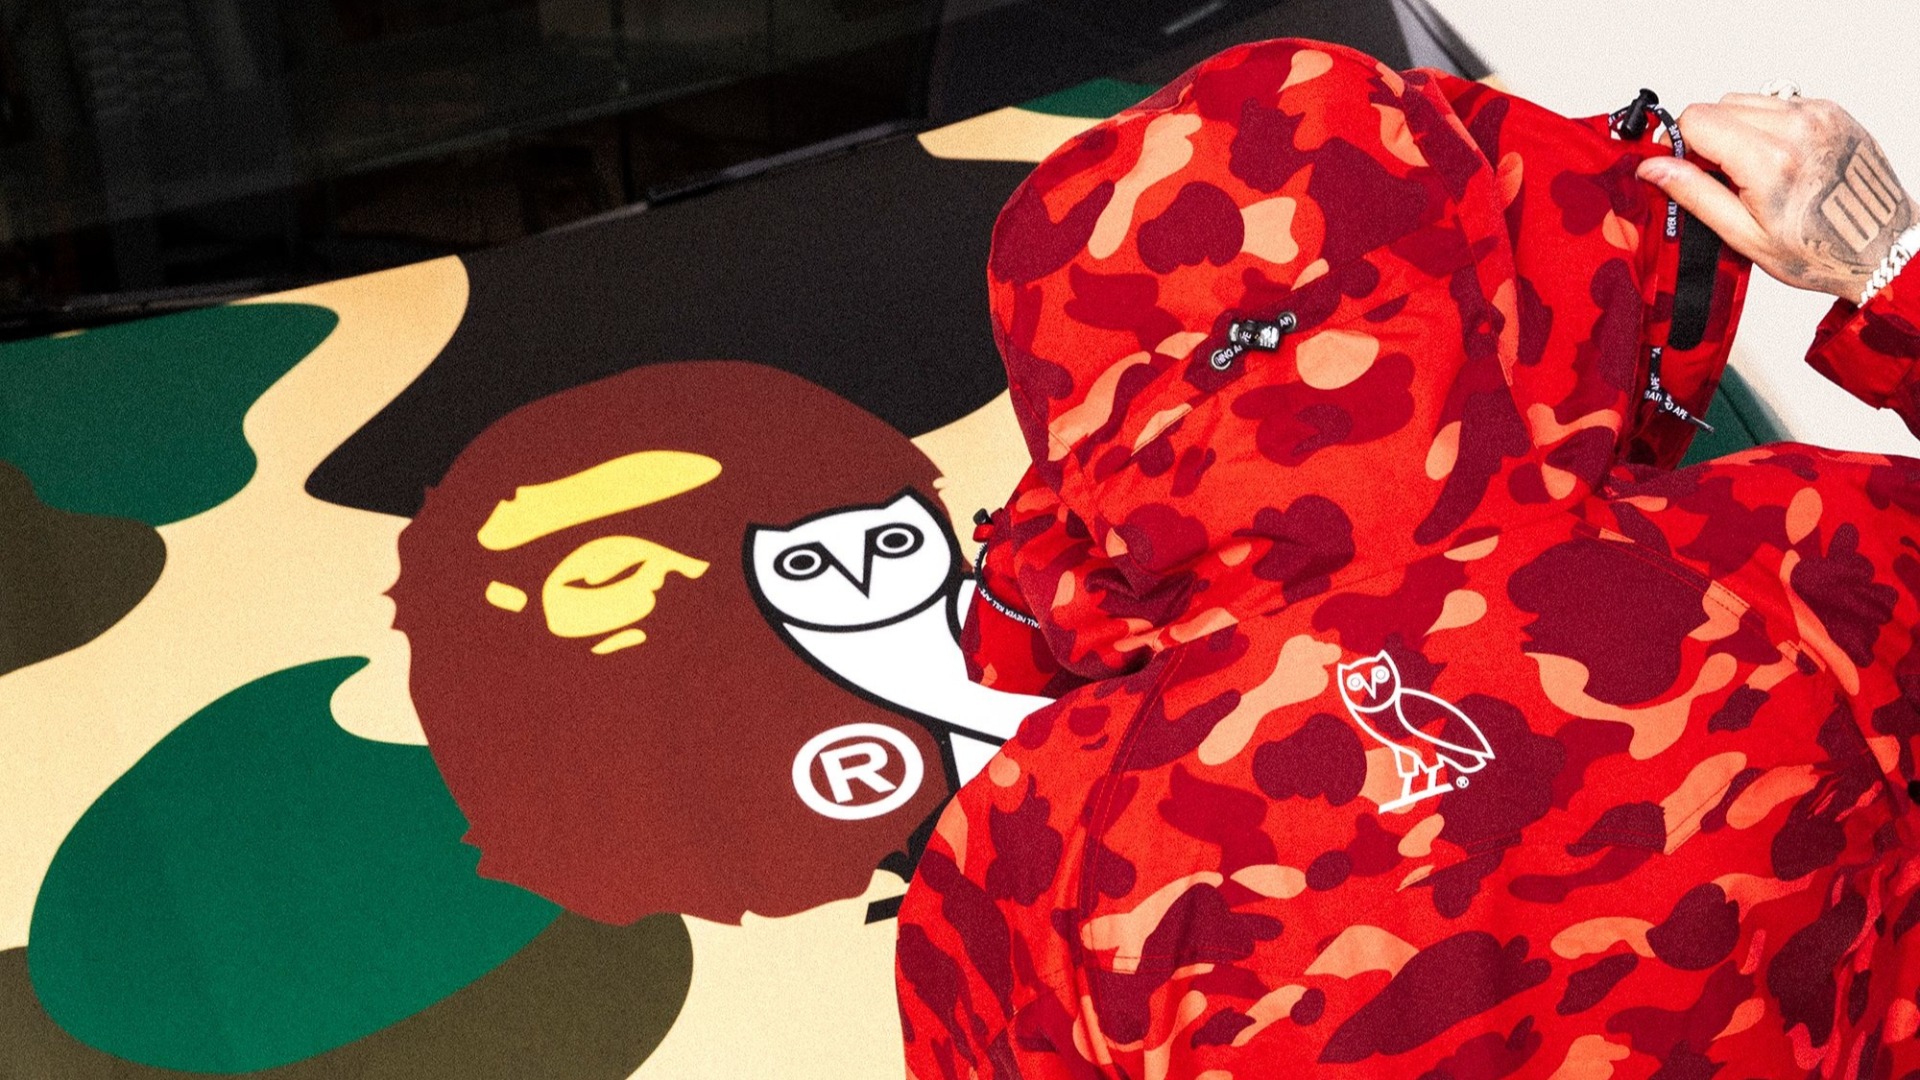 Here's a Full Look at Bape's First Collab Collection With Drake's